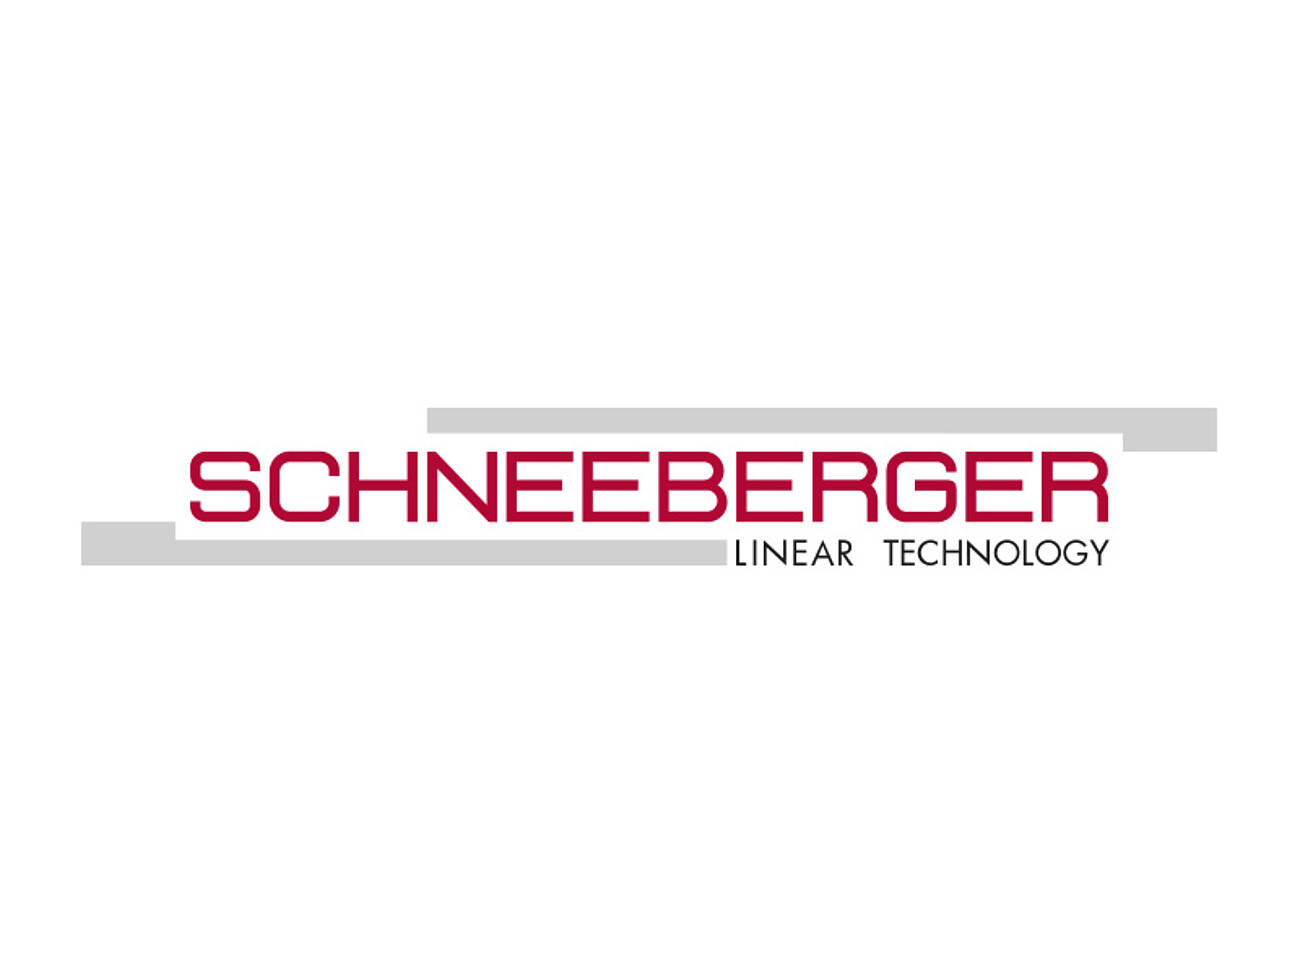 SCHNEEBERGER expands in the Asian market